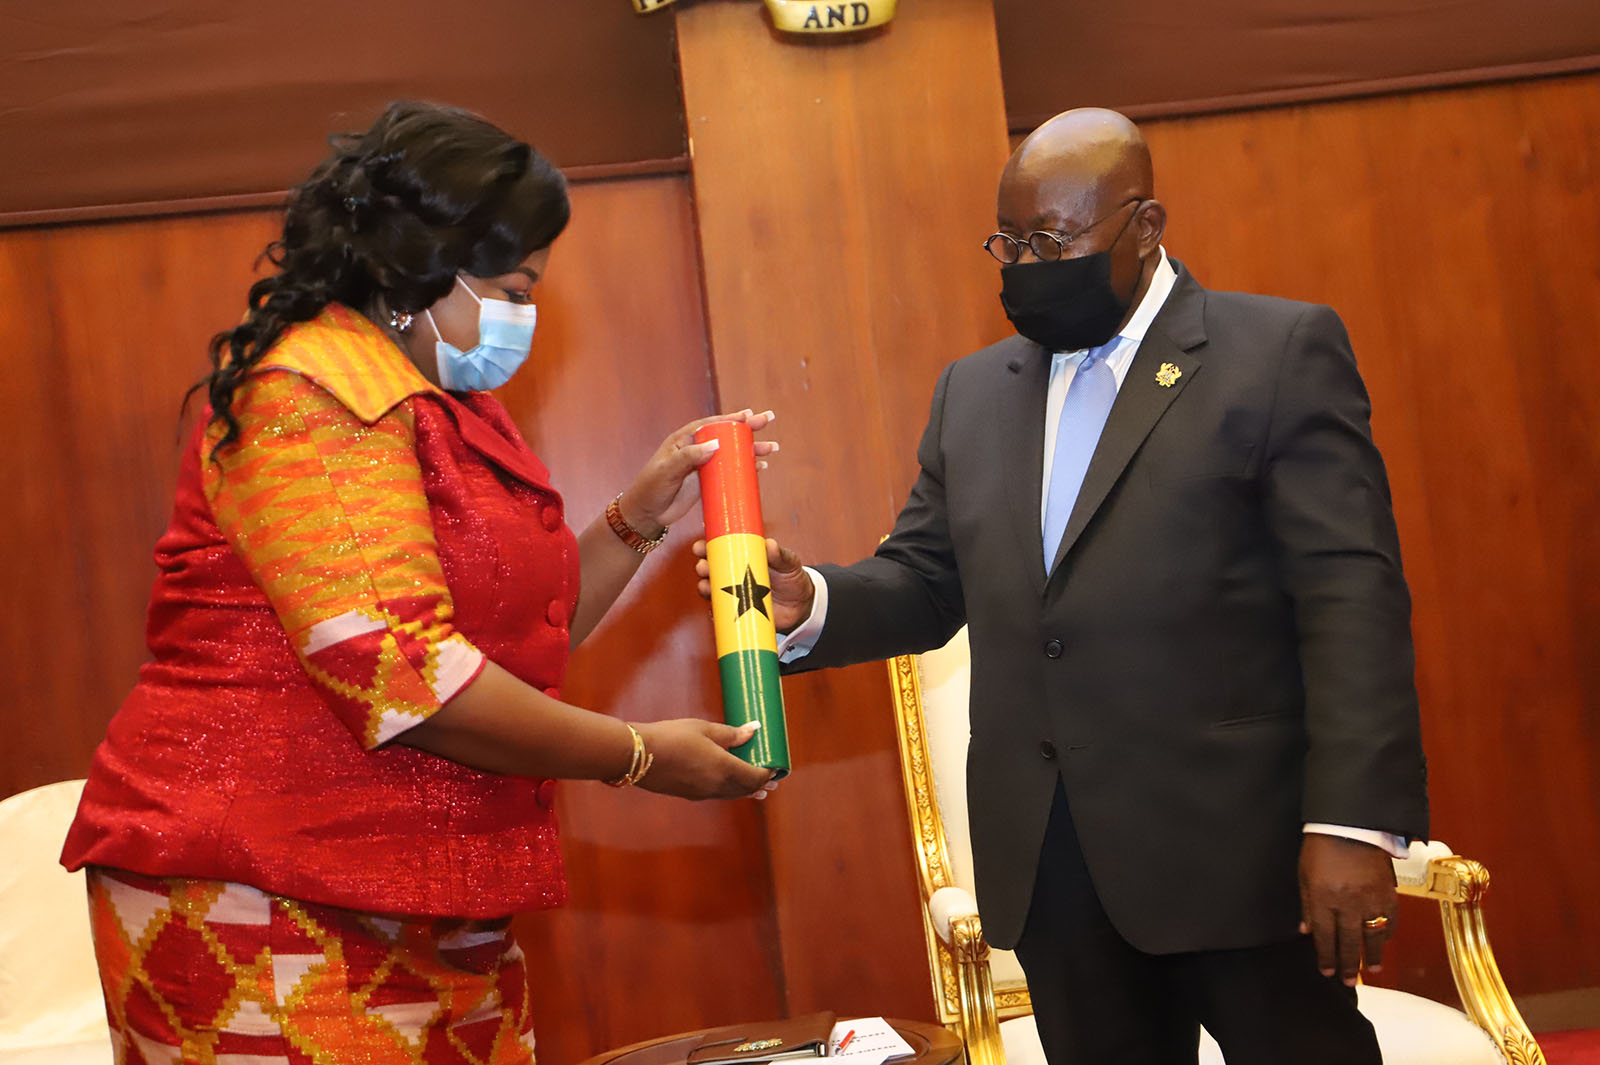 Mrs Sylvia Naa Adaawa Annoh, Denmark receiving her credentials from President Akufo-Addo. PICTURES BY SAMUEL TEI ADANO